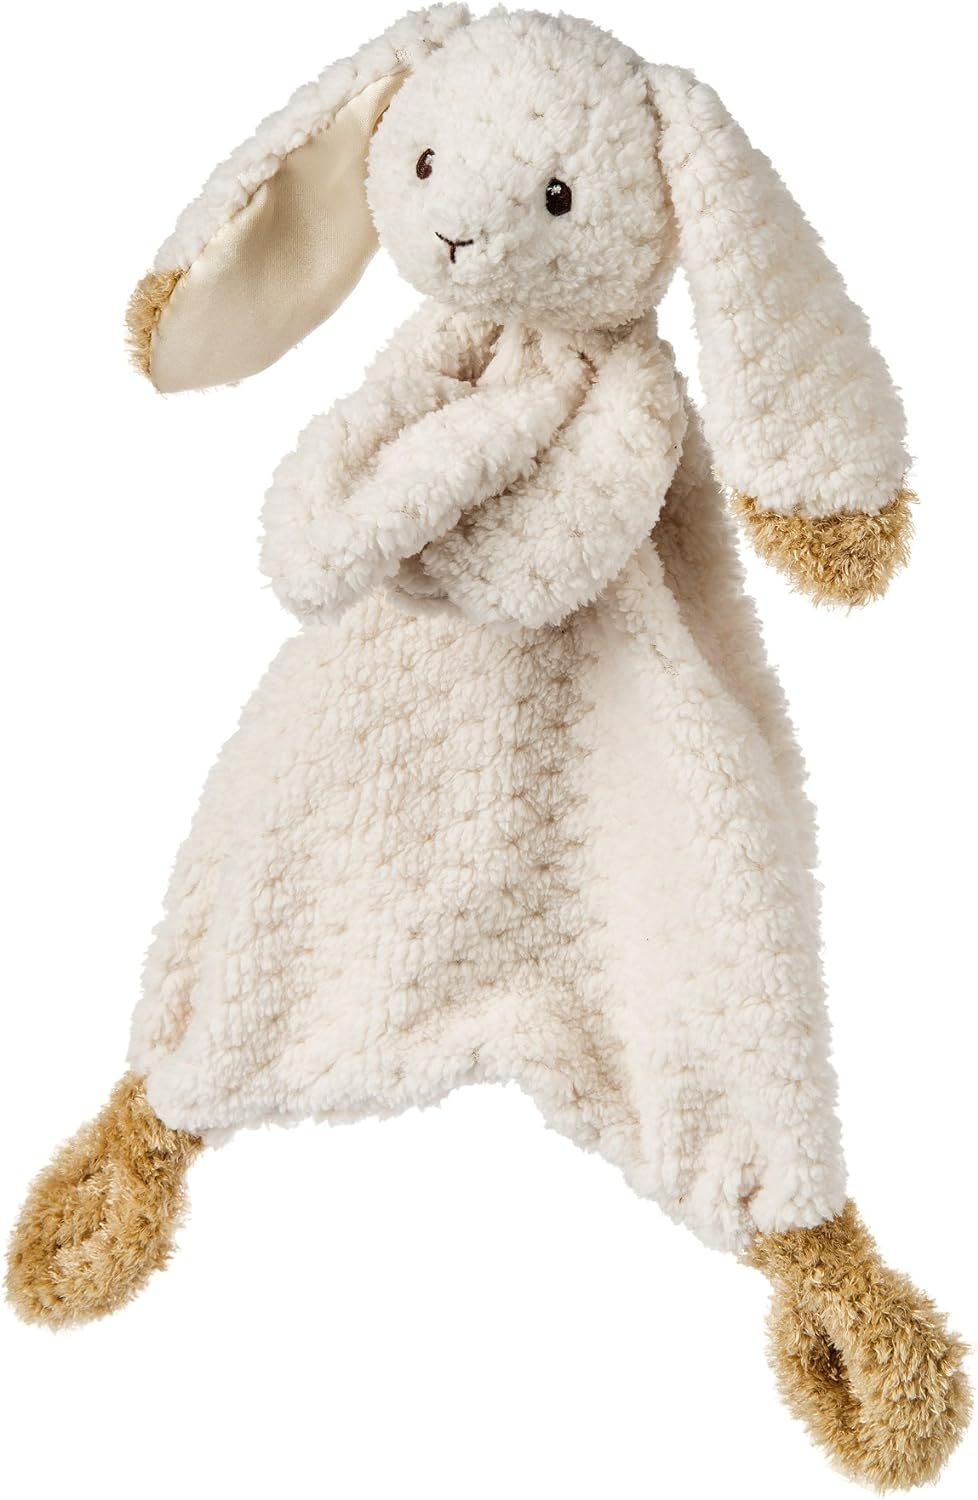 Mary Meyer Lovey Soft Toy, 13-Inches, Oatmeal Bunny | Amazon (US)